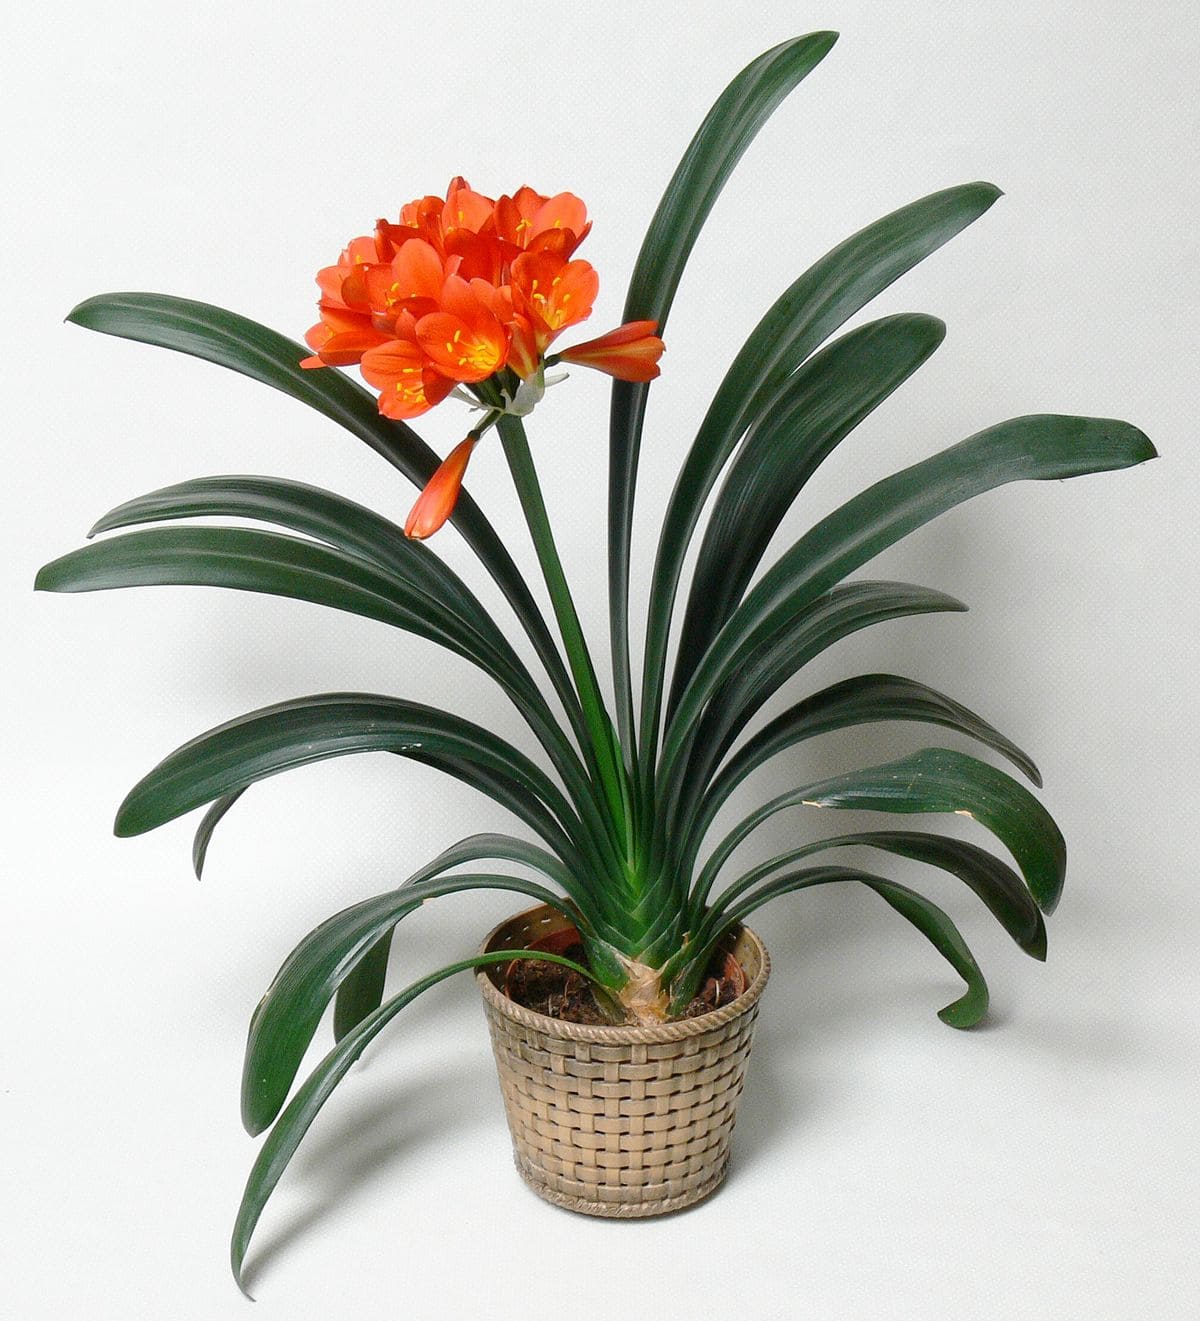 9 colors of indoor plants that can warm your home in winter - 63